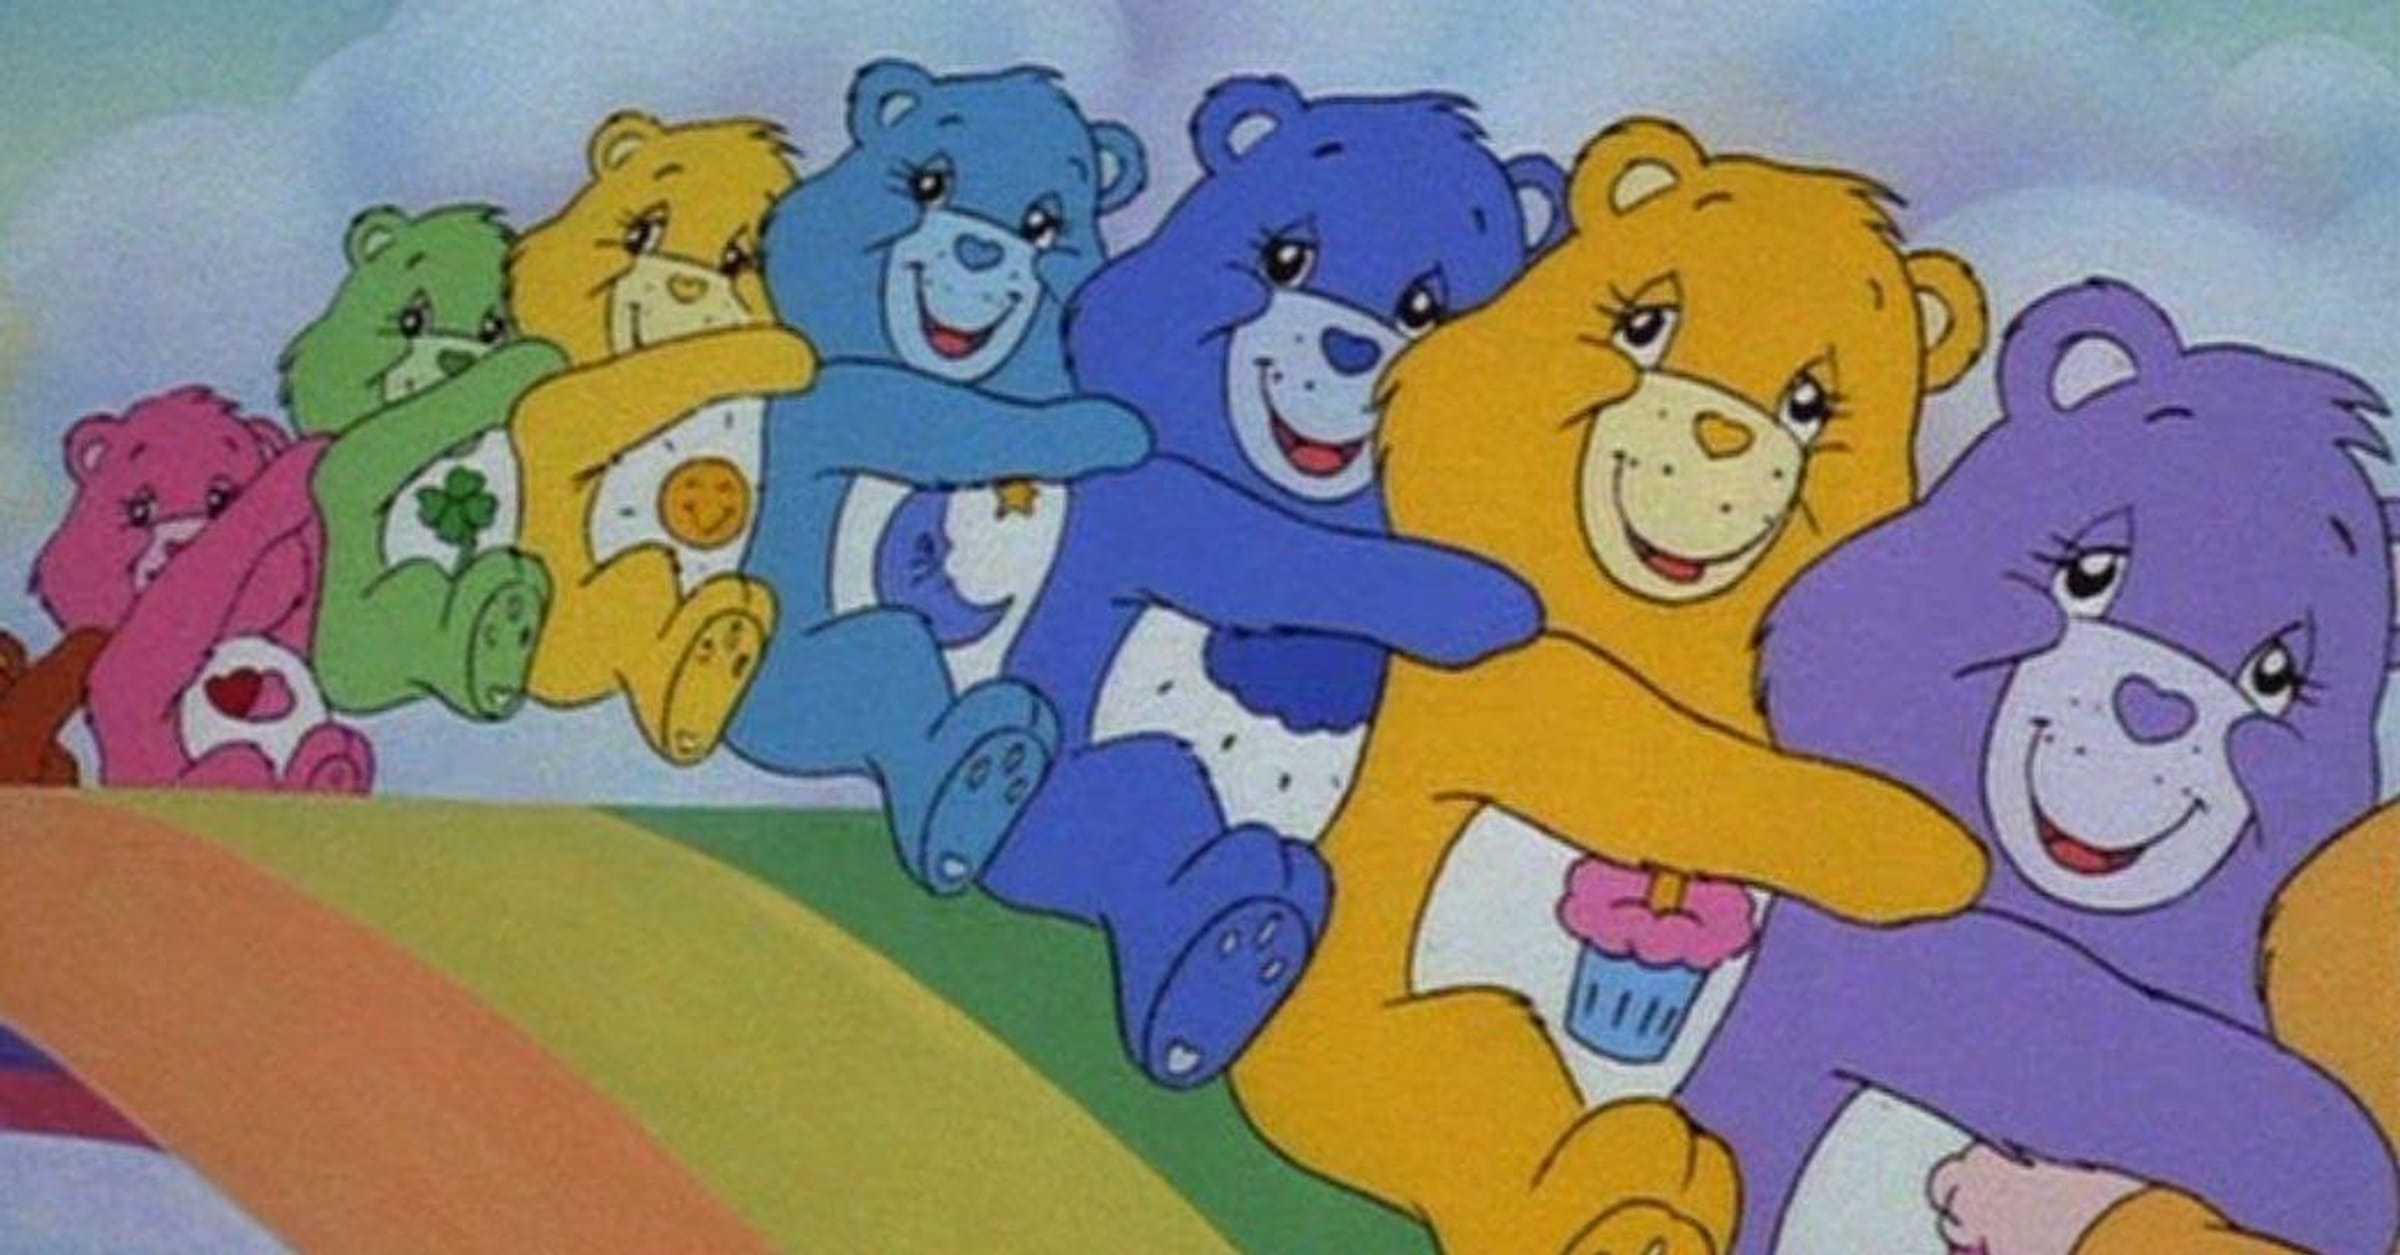 Kids Today Can Watch Their Favorite TV Shows Like 'Care Bears